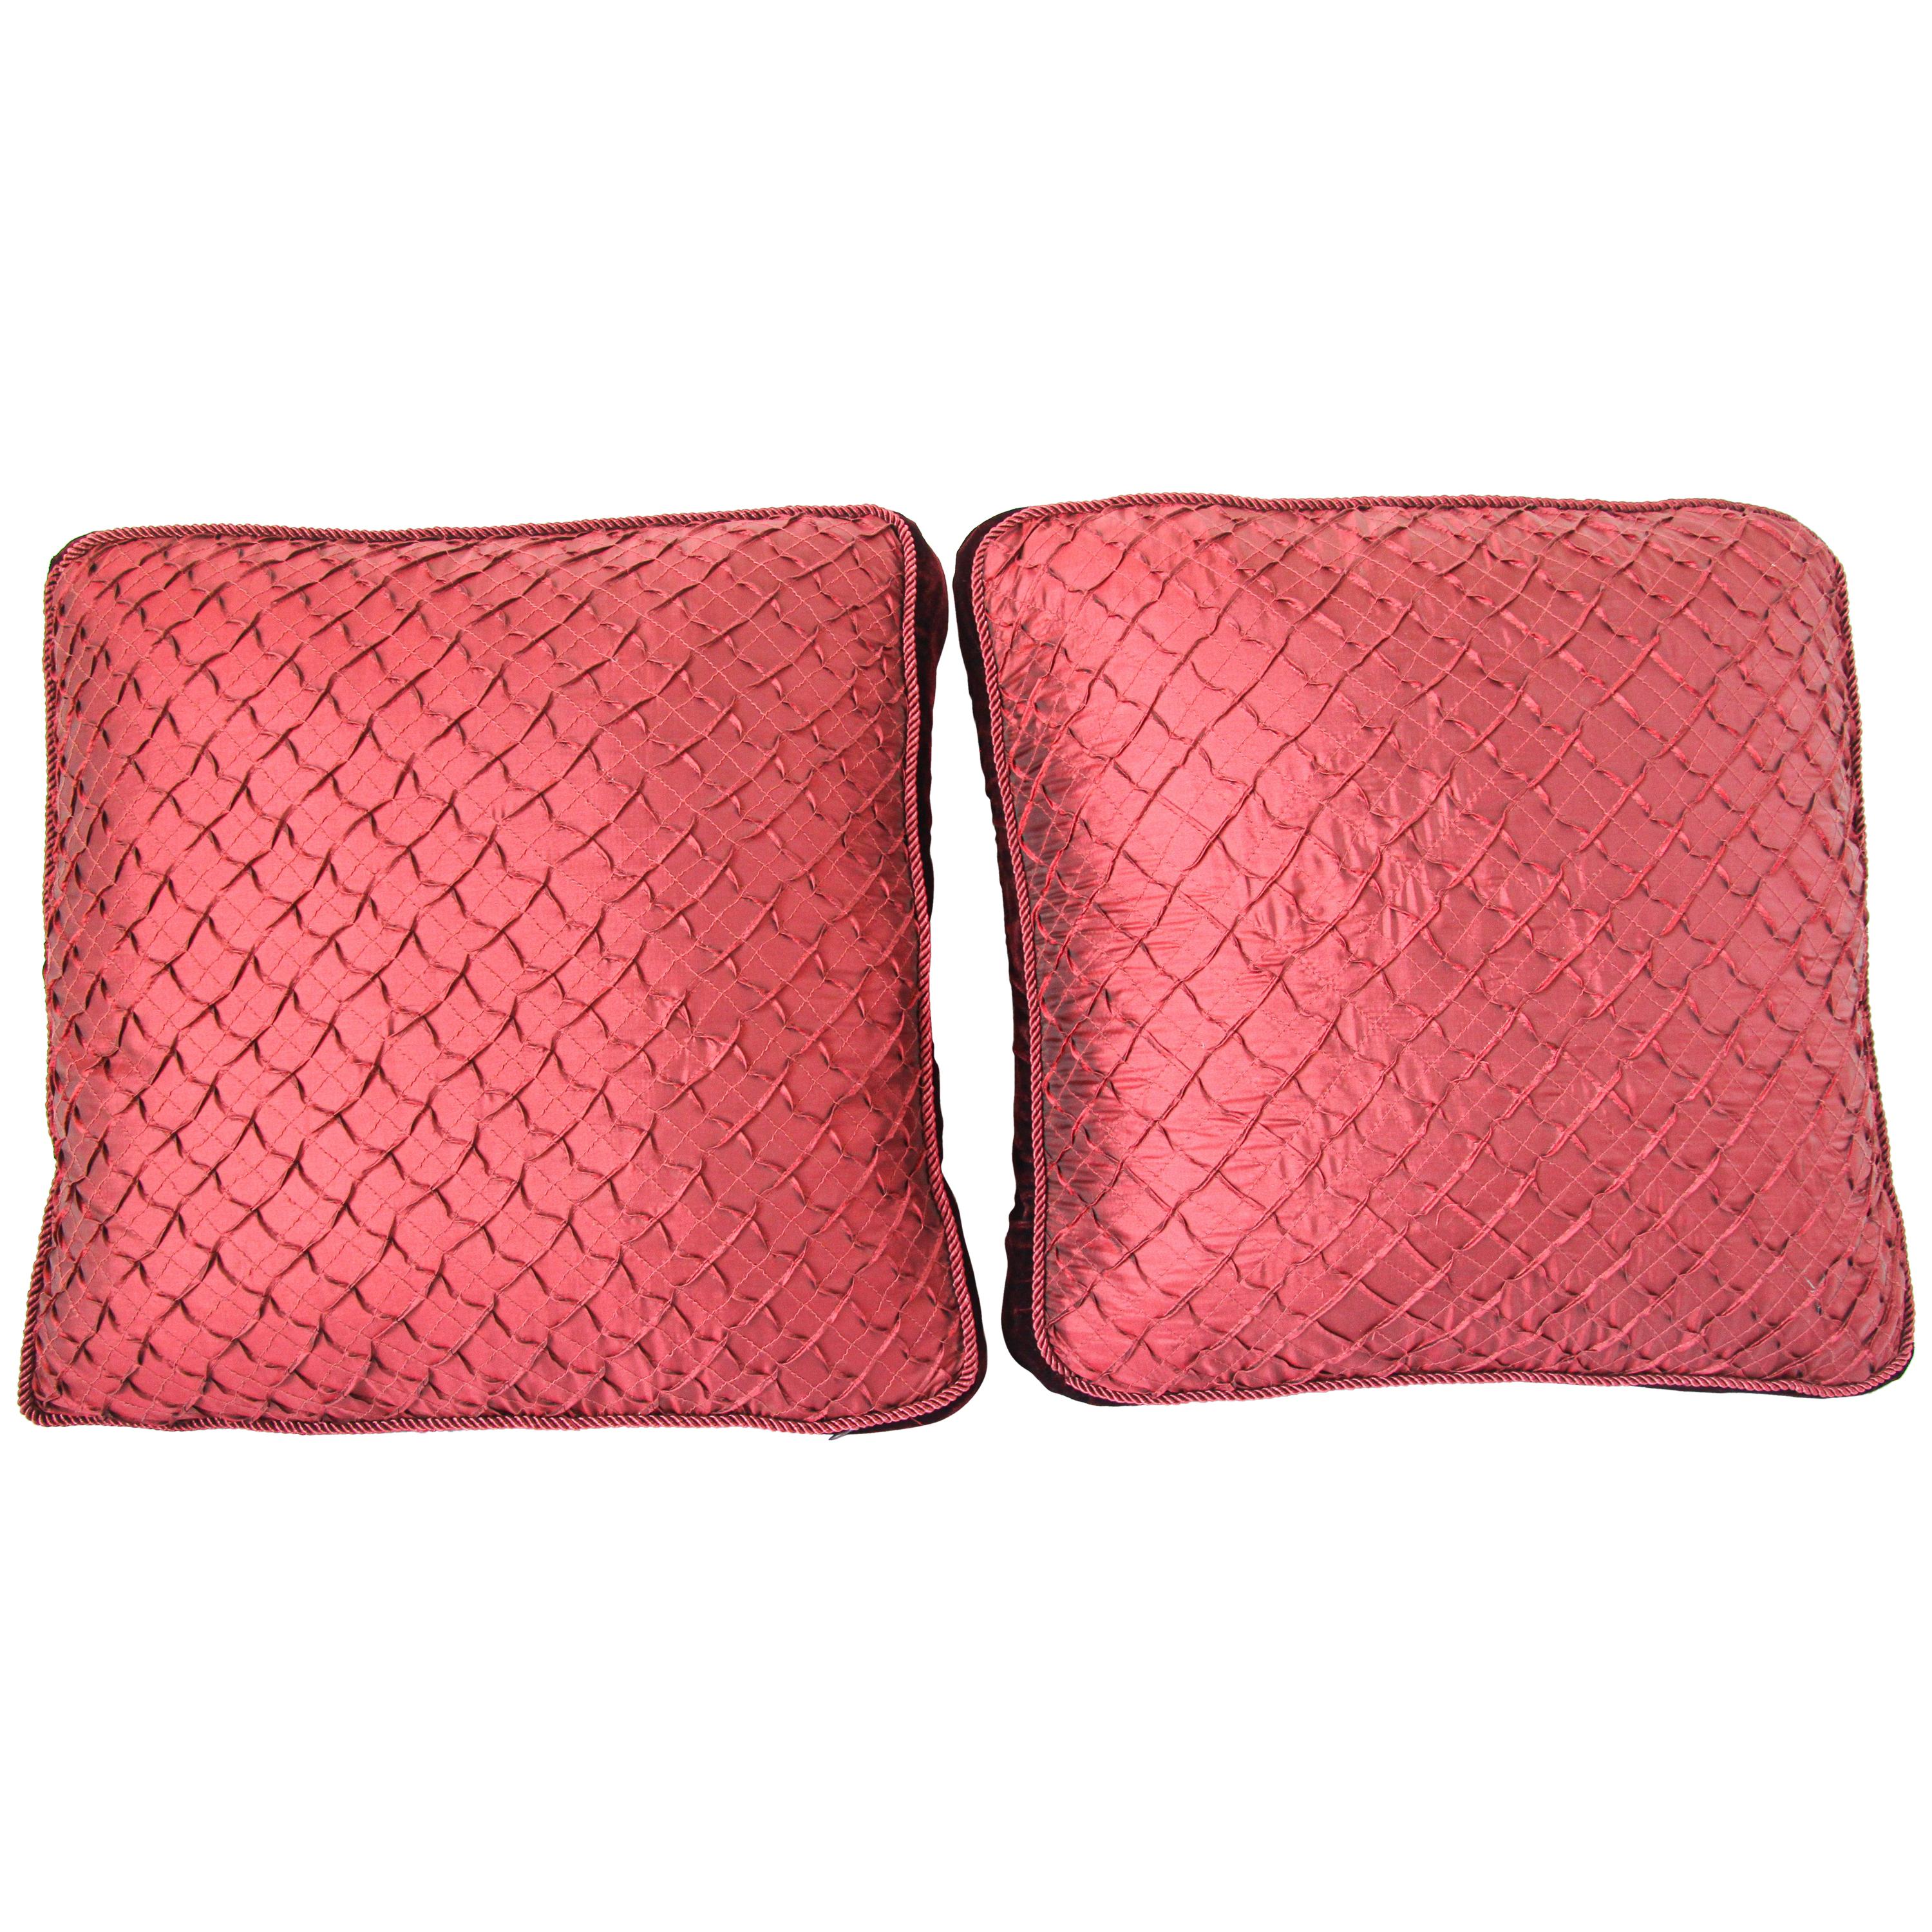 large red pillows